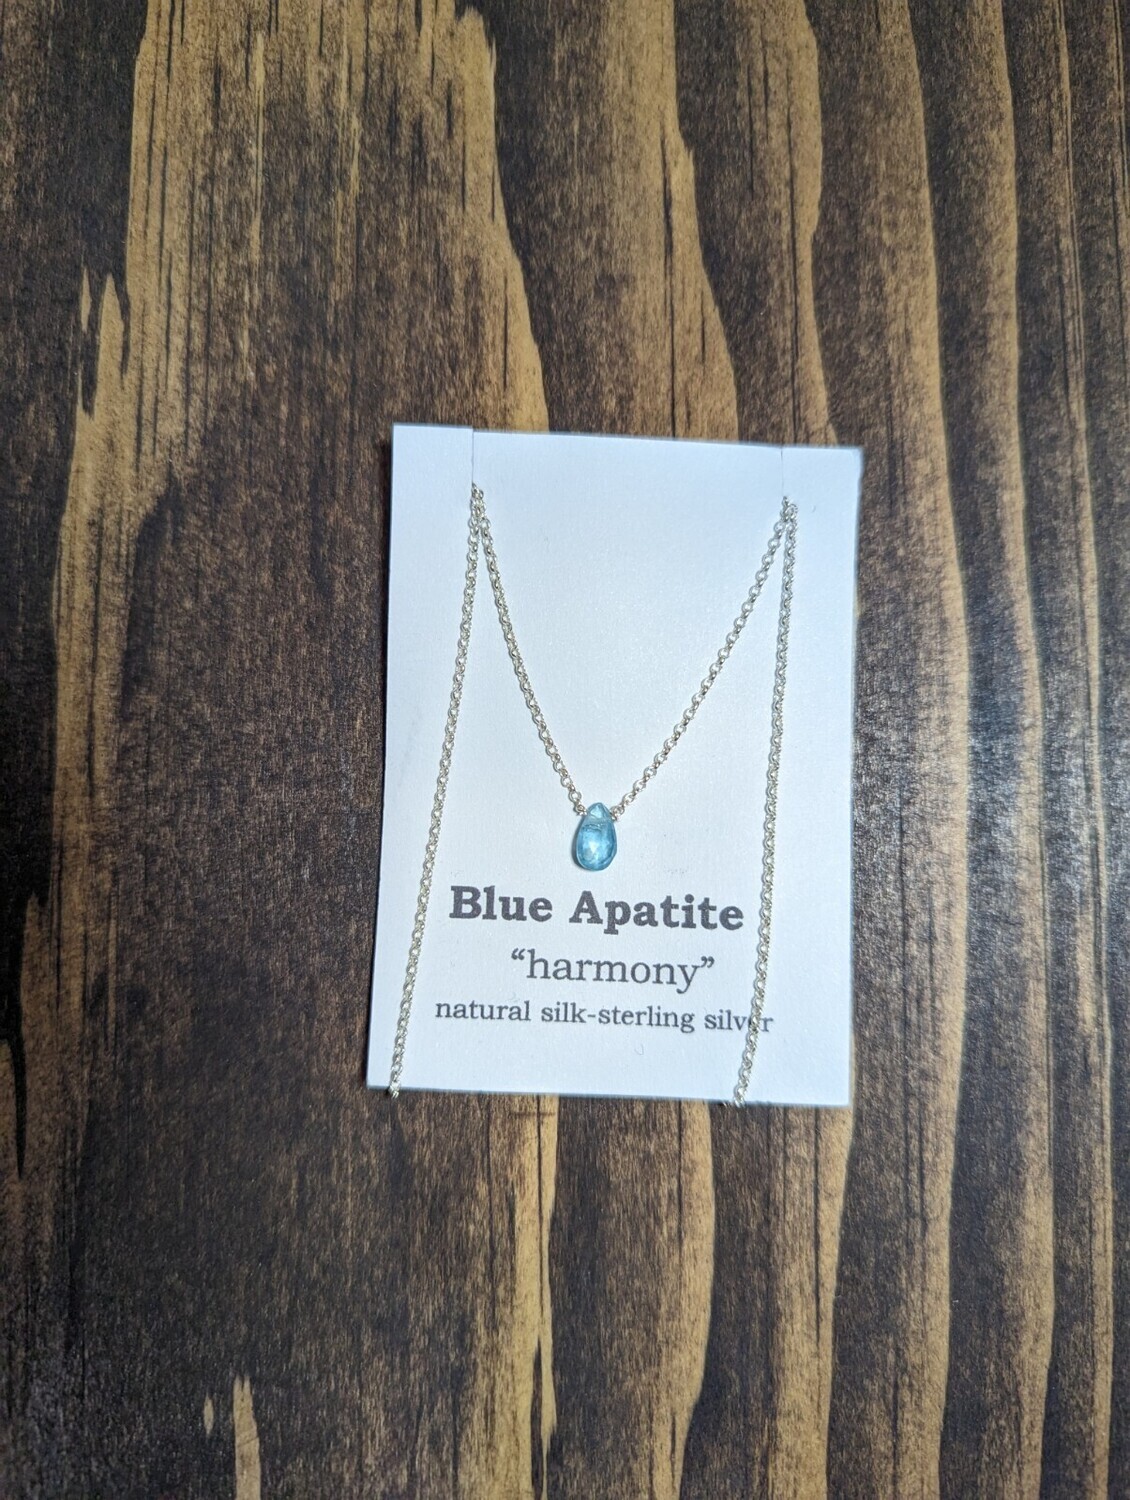 Blue Apatite "Harmony" Sterling Silver Necklace